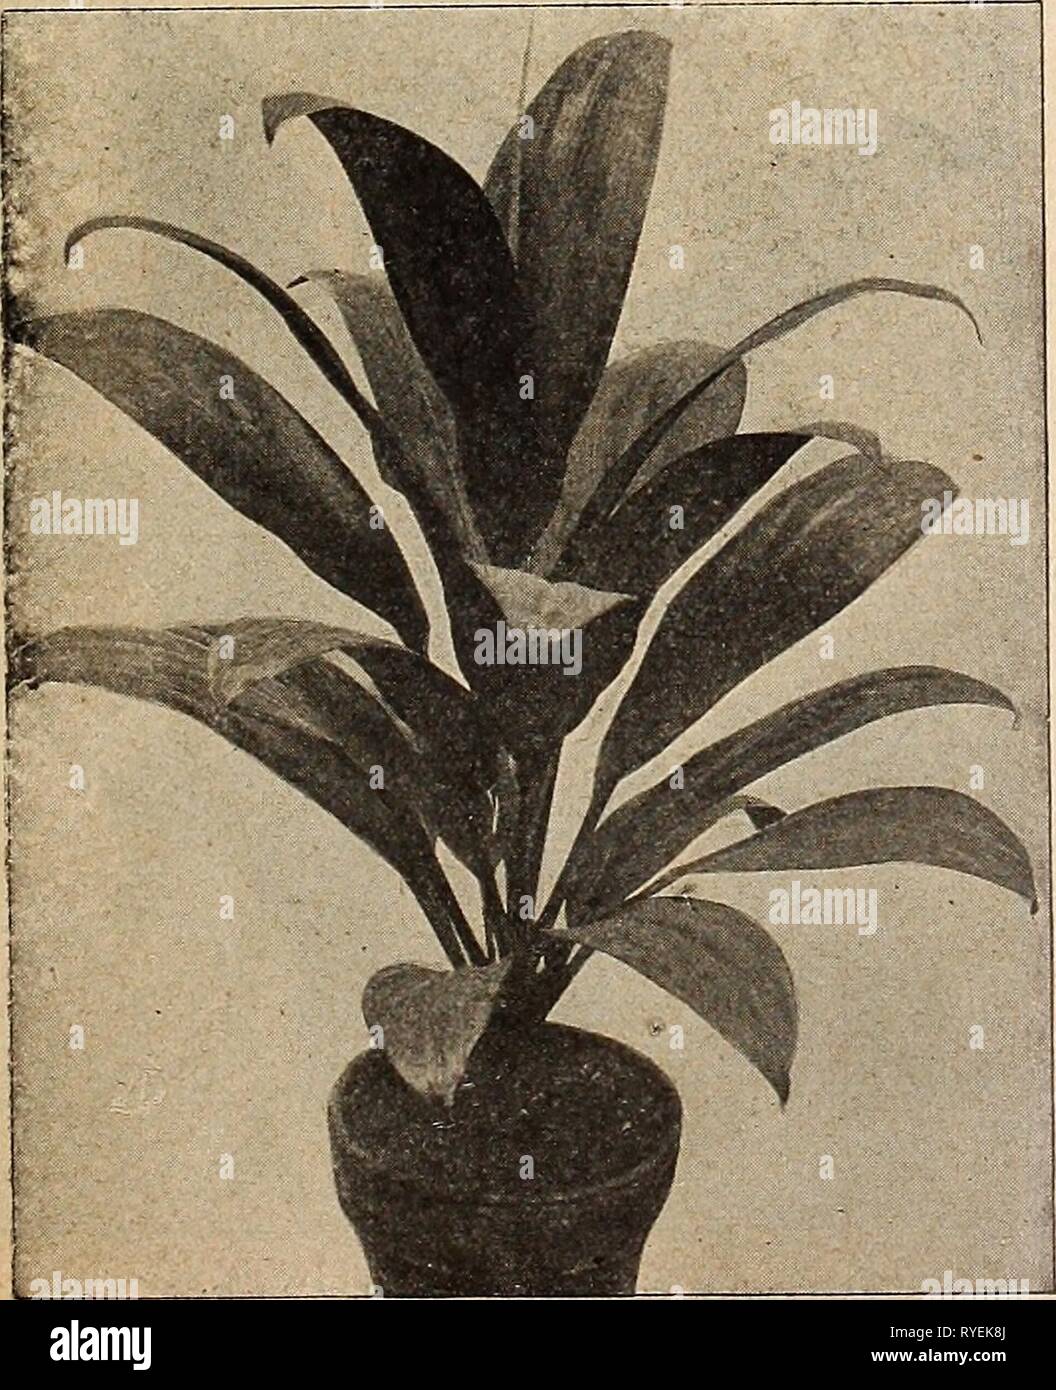 Dreer's wholesale price list : decorative and other plants for florists, bulbs for forcing, seasonable flower seeds, florists' requisites, etc  dreerswholesalep1918henr Year: 1918  Dracaena Fragrans. A splendid lot of young plants for growing- on. 2-inch pots . . .' $1.75per doz.; $12.00 per 100 2.50 18.00 4.00 30.00 6.00 40.00    Dracaena Qodseffiana. A useful plant for use in Fern-dish work. 2'/i-inch pots $1.75 per doz.; $12.00 per 100. 3 ' 2.00 ' 15.00 Dracsna Imperialis. 2-inch pots $2.00 per doz.; $15.00 per 100 3 ' 3.60 ' 25.00 4 ' 50 cts. each Dracaena Indivisa. 3-inch pots $1.00 per d Stock Photo